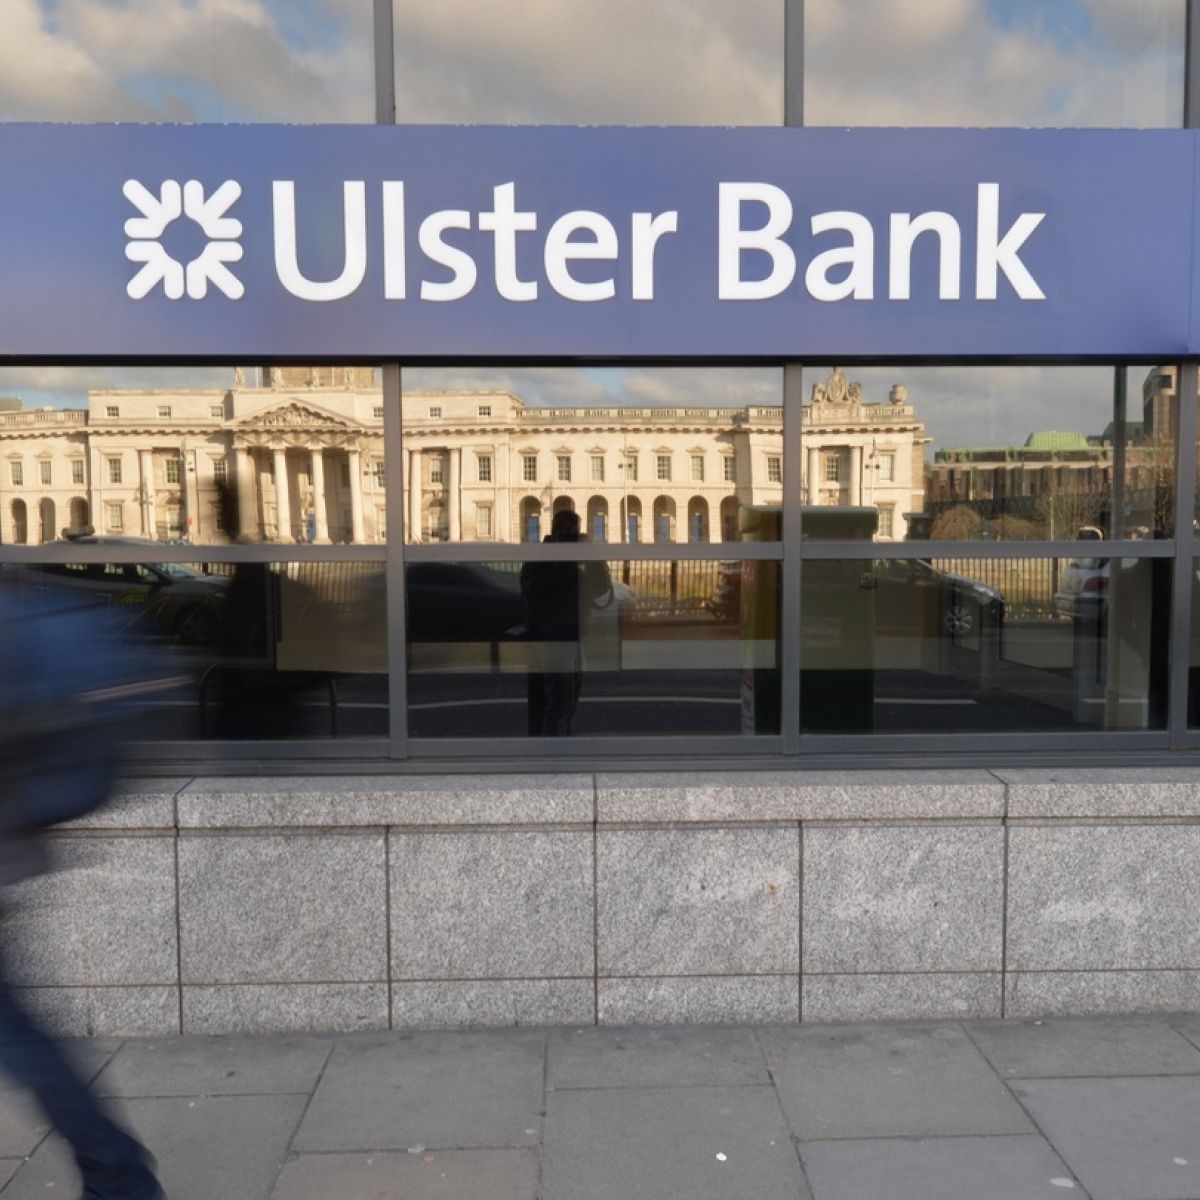 Doctor Wins Appeal Against Ulster Bank Accessing His Savings - 